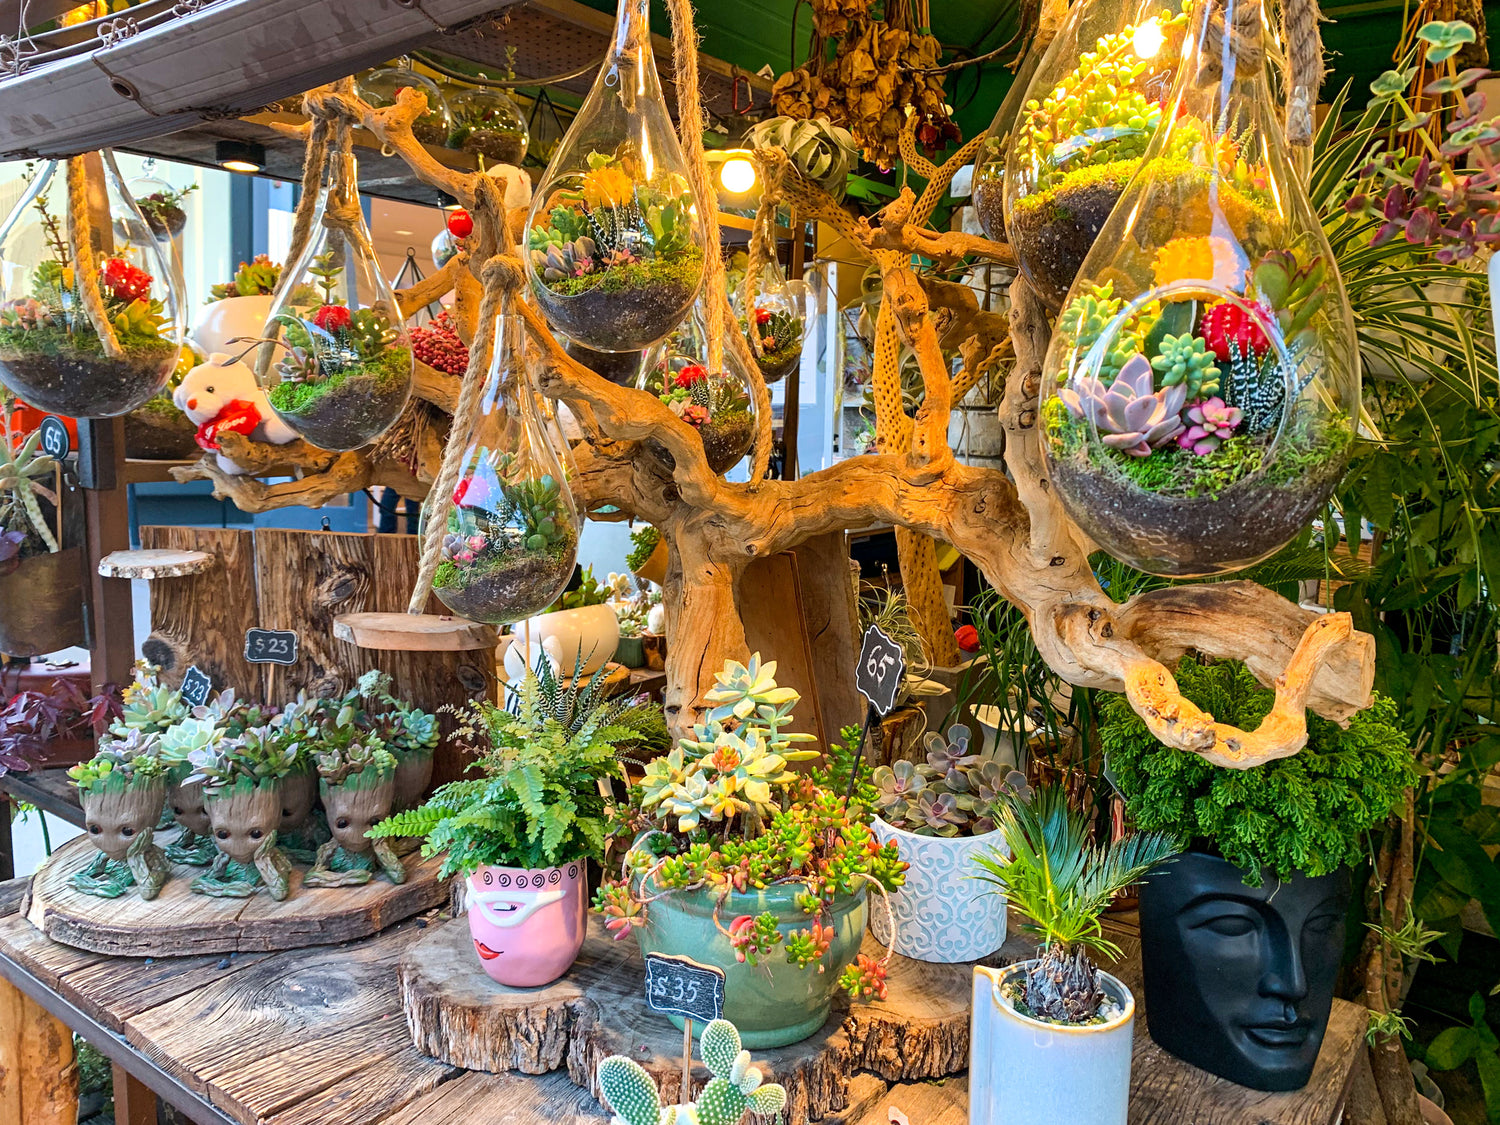 Dewy flowers plants shop located in los angeles selling live succulent arrangements potted house plants and bonsai trees.